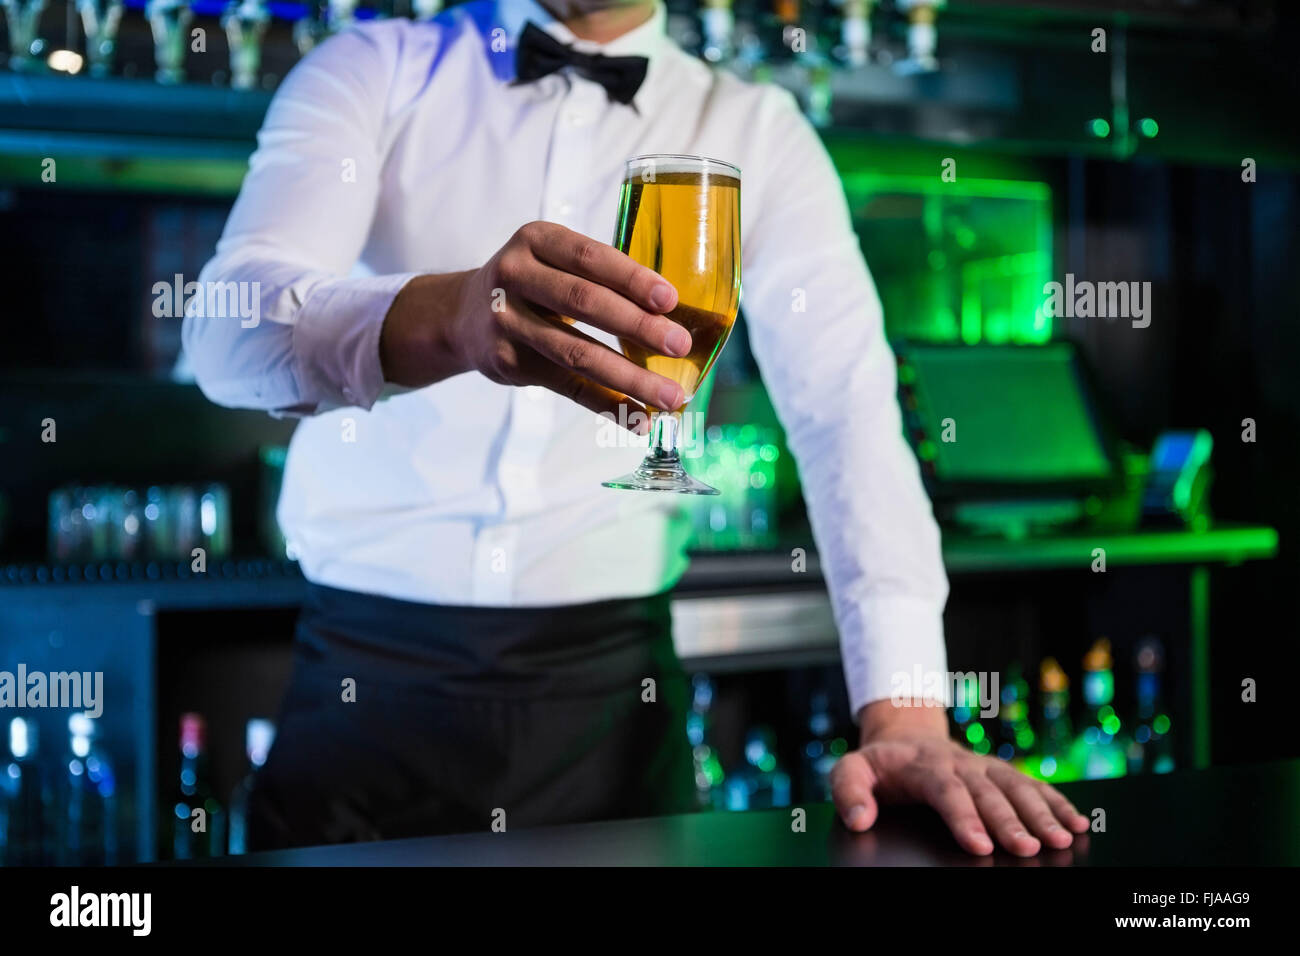 Bartender serving a glass of beer Stock Photo